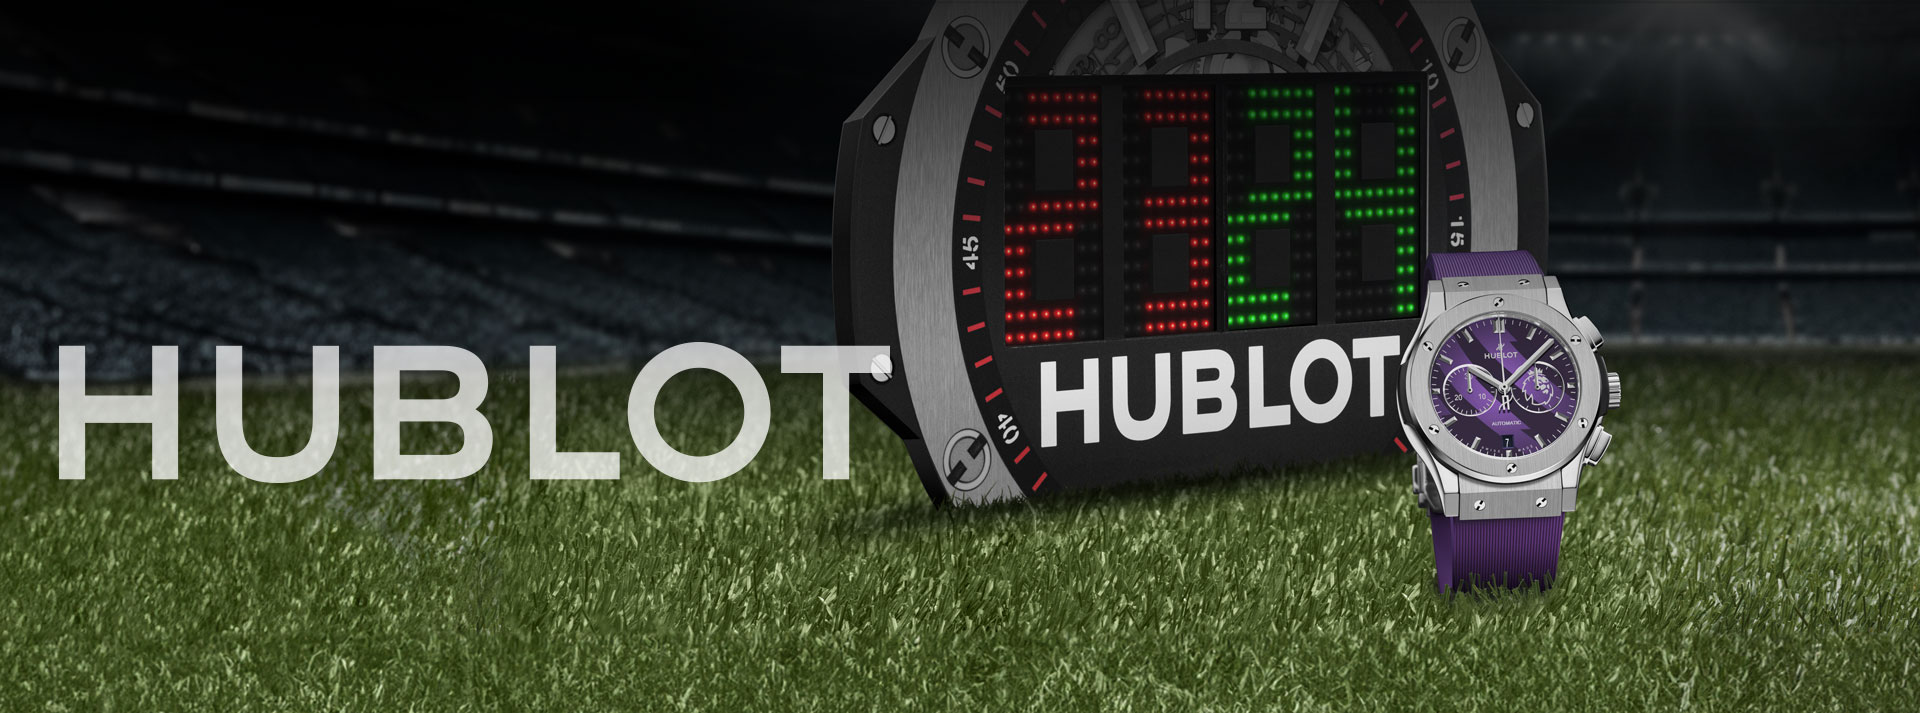 Hublot Limited Edition Watches